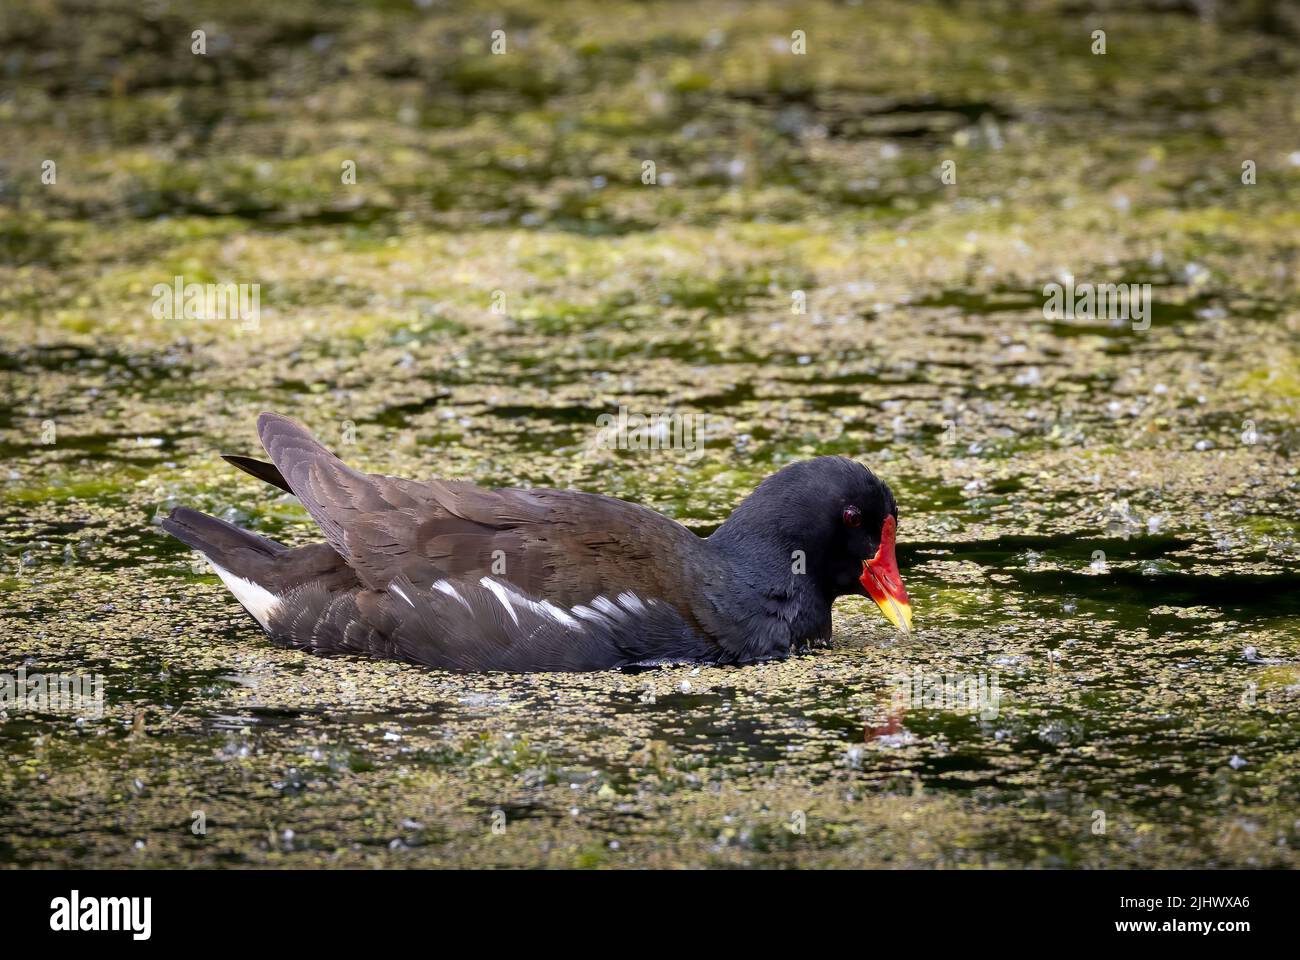 A beautiful Common Moorhen, (Gallinula chloropus), swimming amongst duck weed on a pond Stock Photo